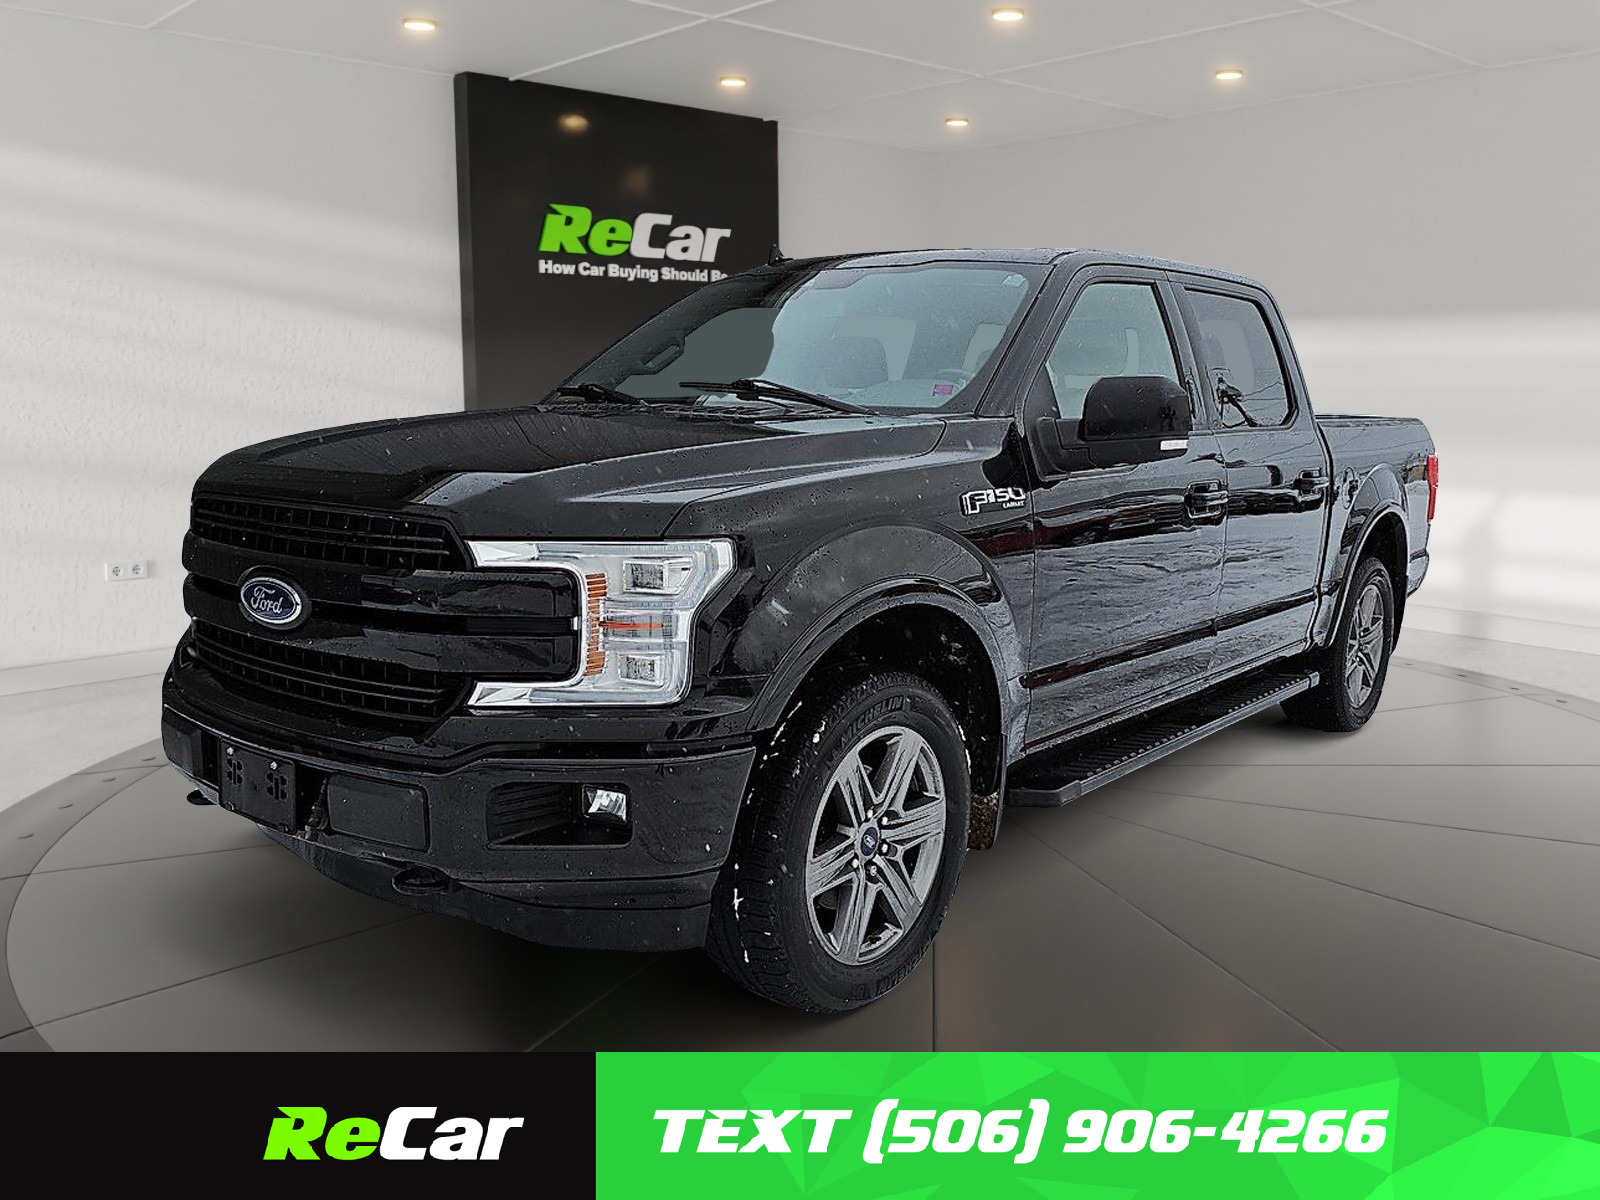 2020 Ford F-150 4X4 | Crew Cab | Heated & Cooled Leather Seats | A